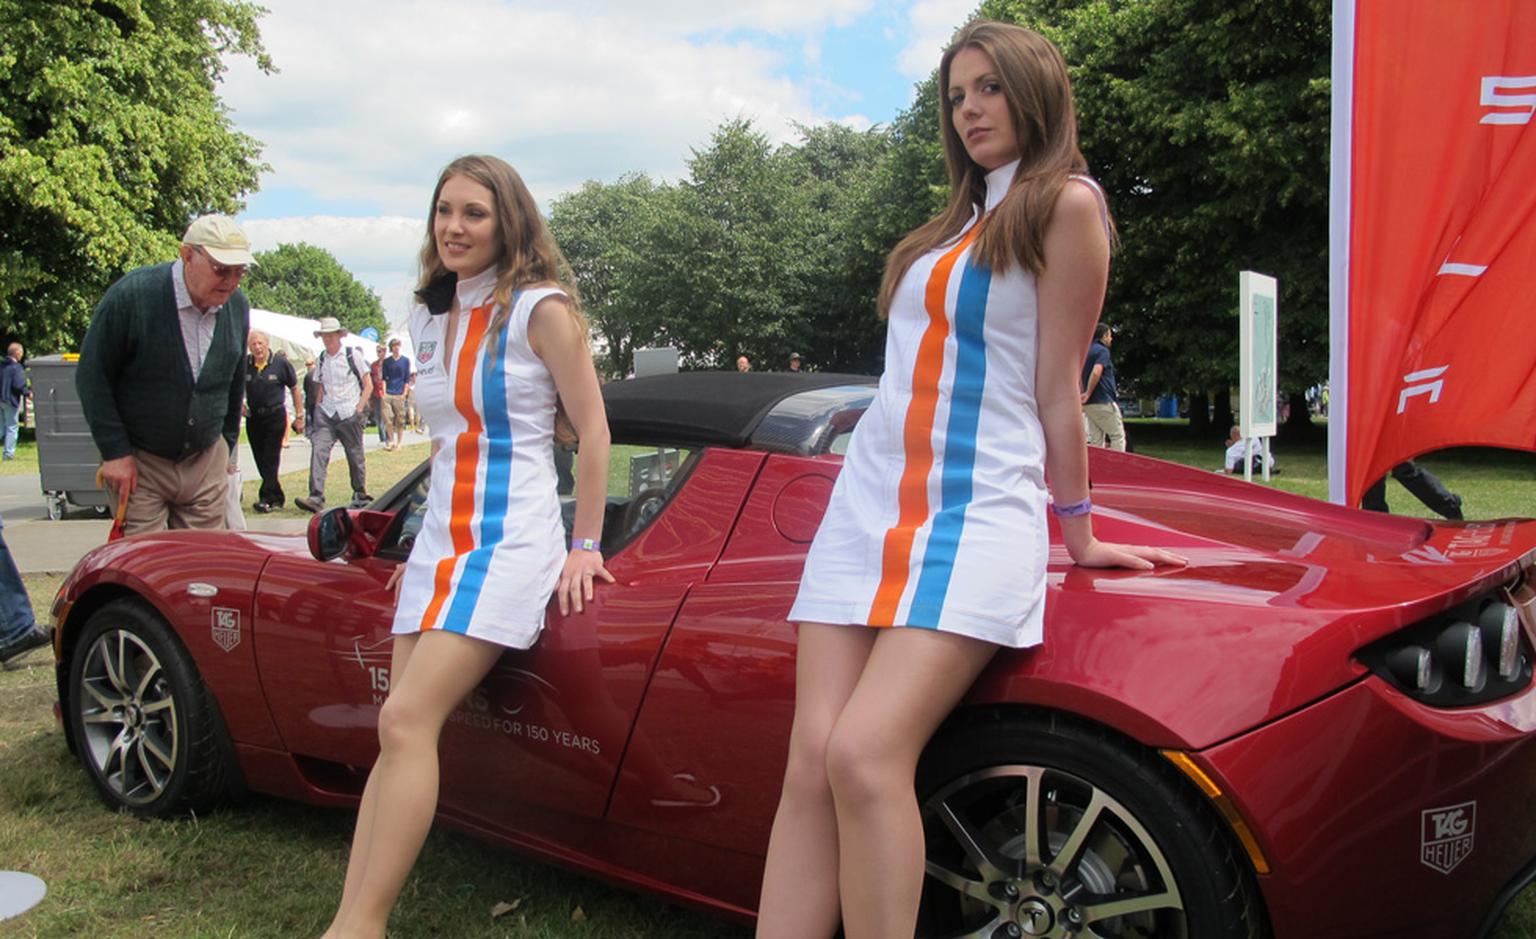 And the girls are out in their Gulf racing stripes for TAG Heuer and leaning against the Tesla eco-sports mobile.